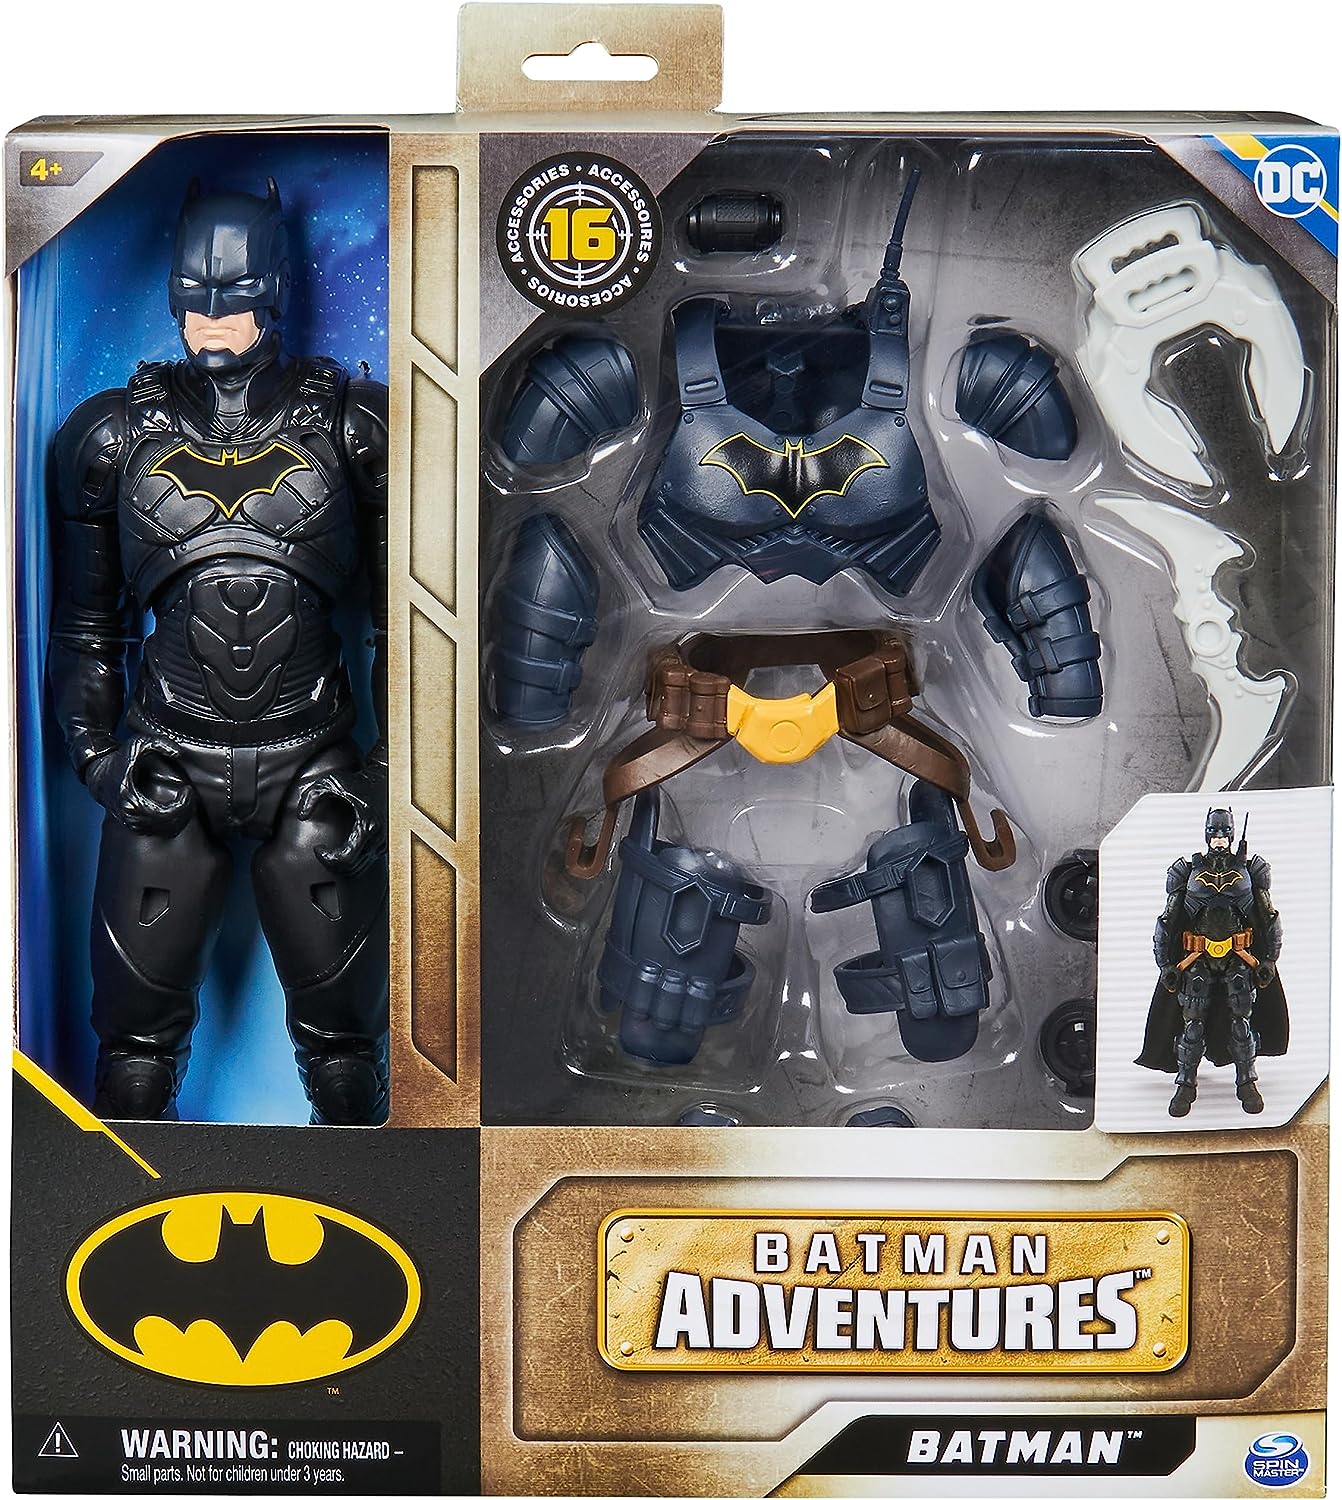 Batman 12-inch Rebirth Batman Action Figure, Kids Toys for Boys Aged 3 and  up 